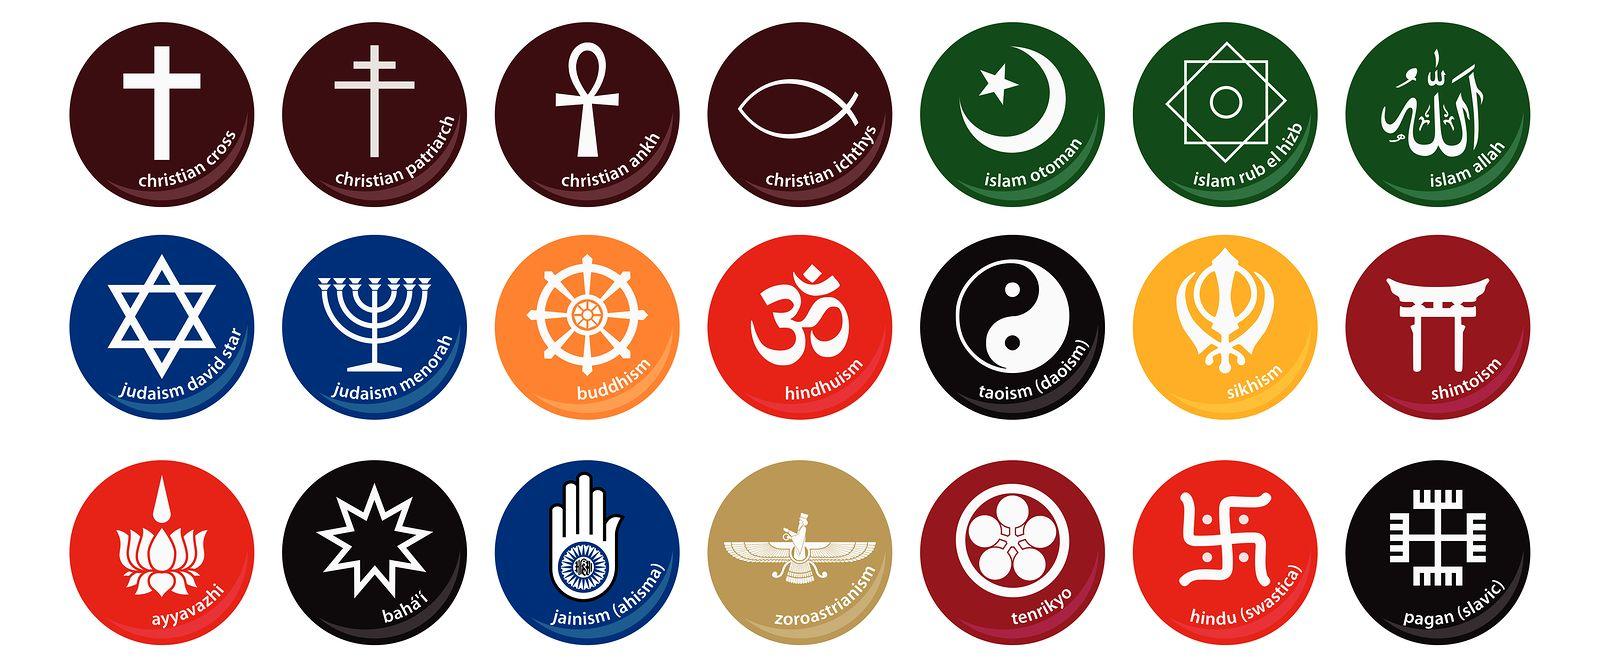 Hindu Religion Logo - You Can Be Indian and Not Hindu: An Agnostic Indian's Thoughts